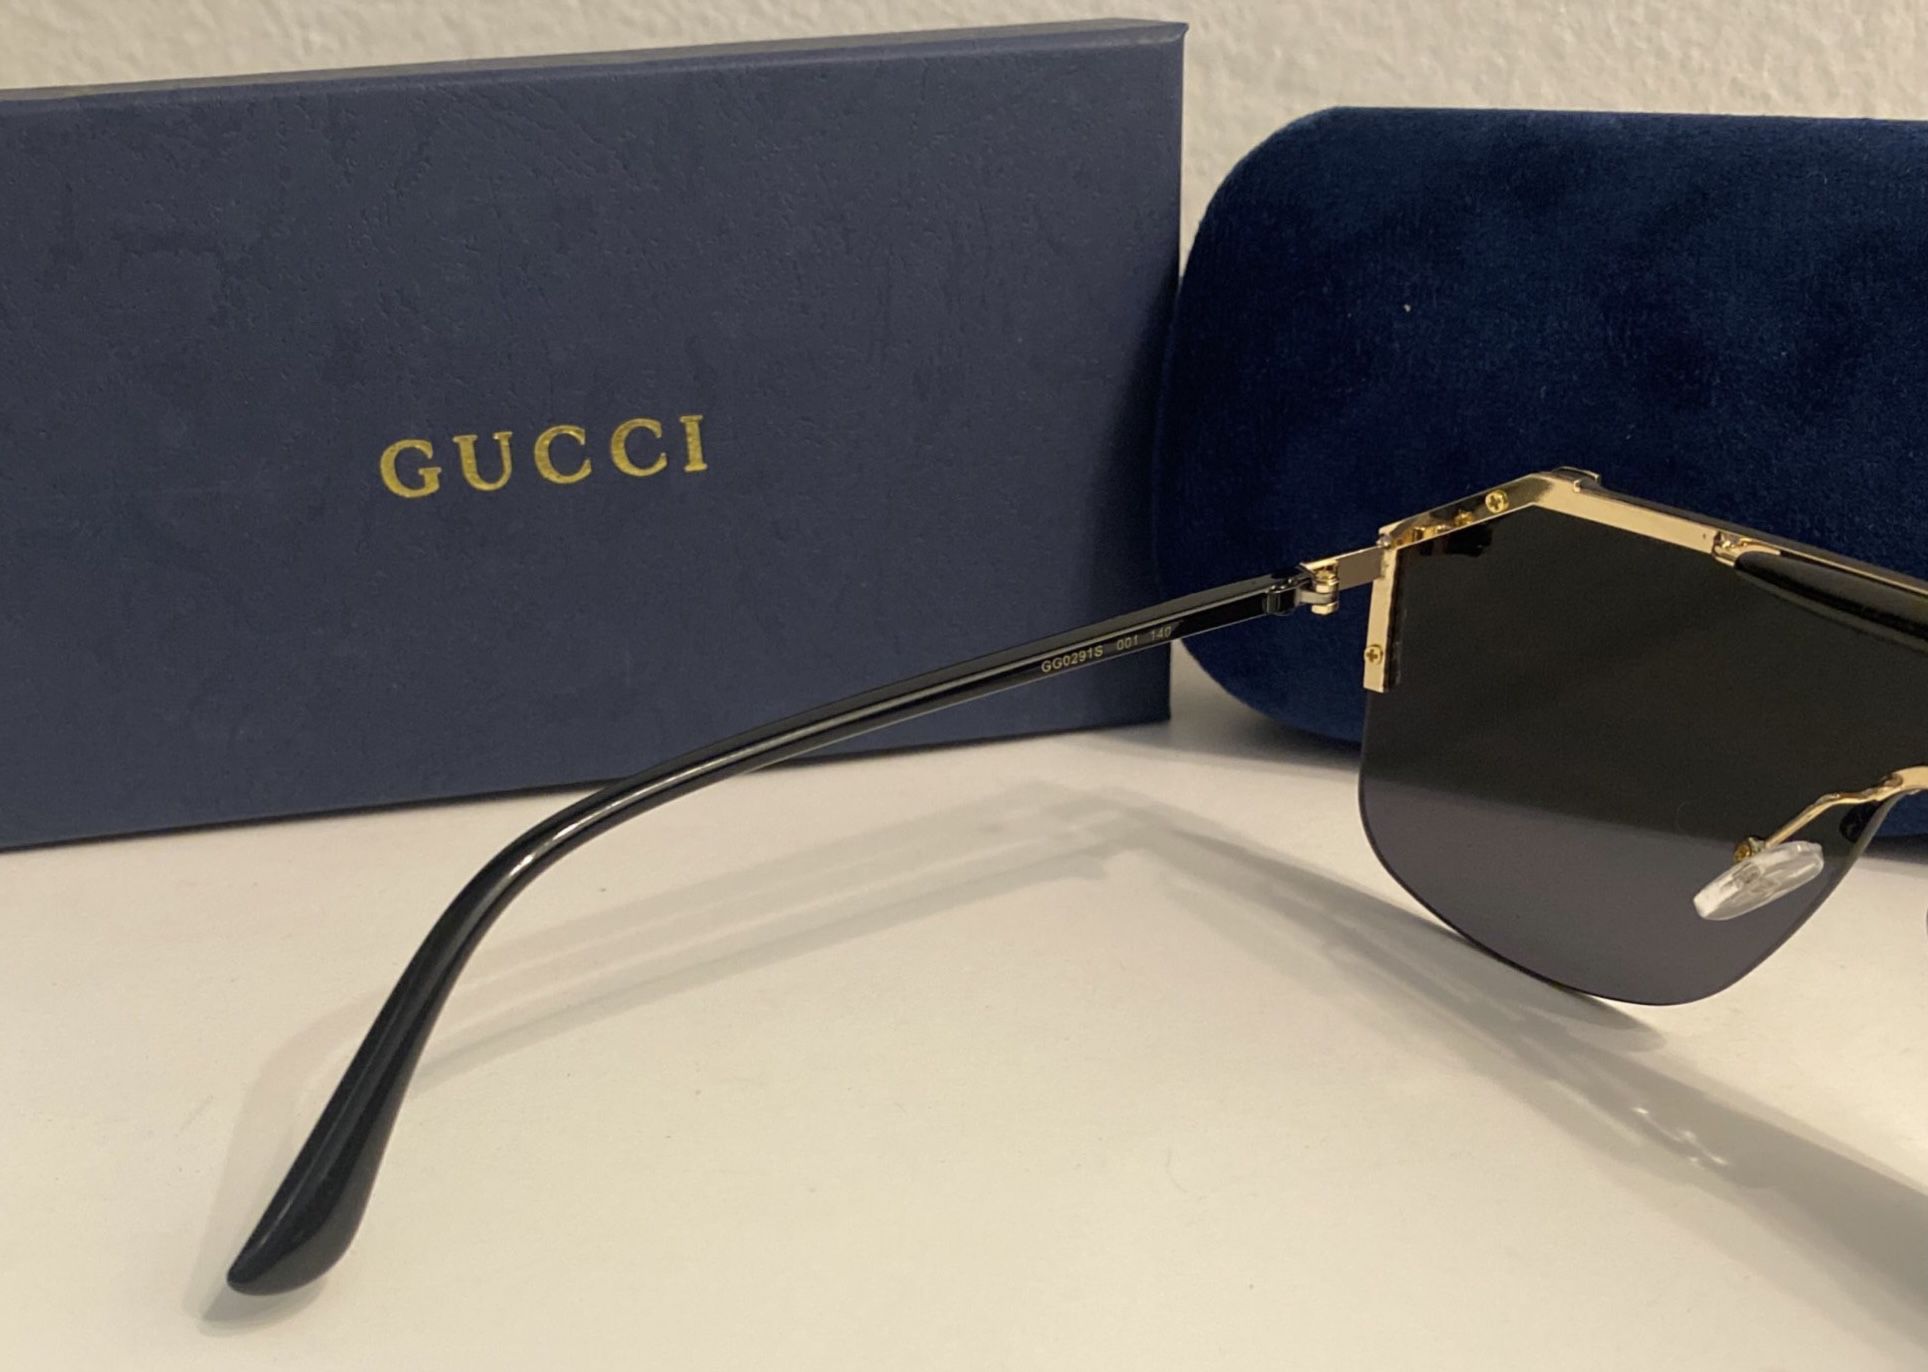 New LV Sport Sunglasses for Sale in Anaheim, CA - OfferUp